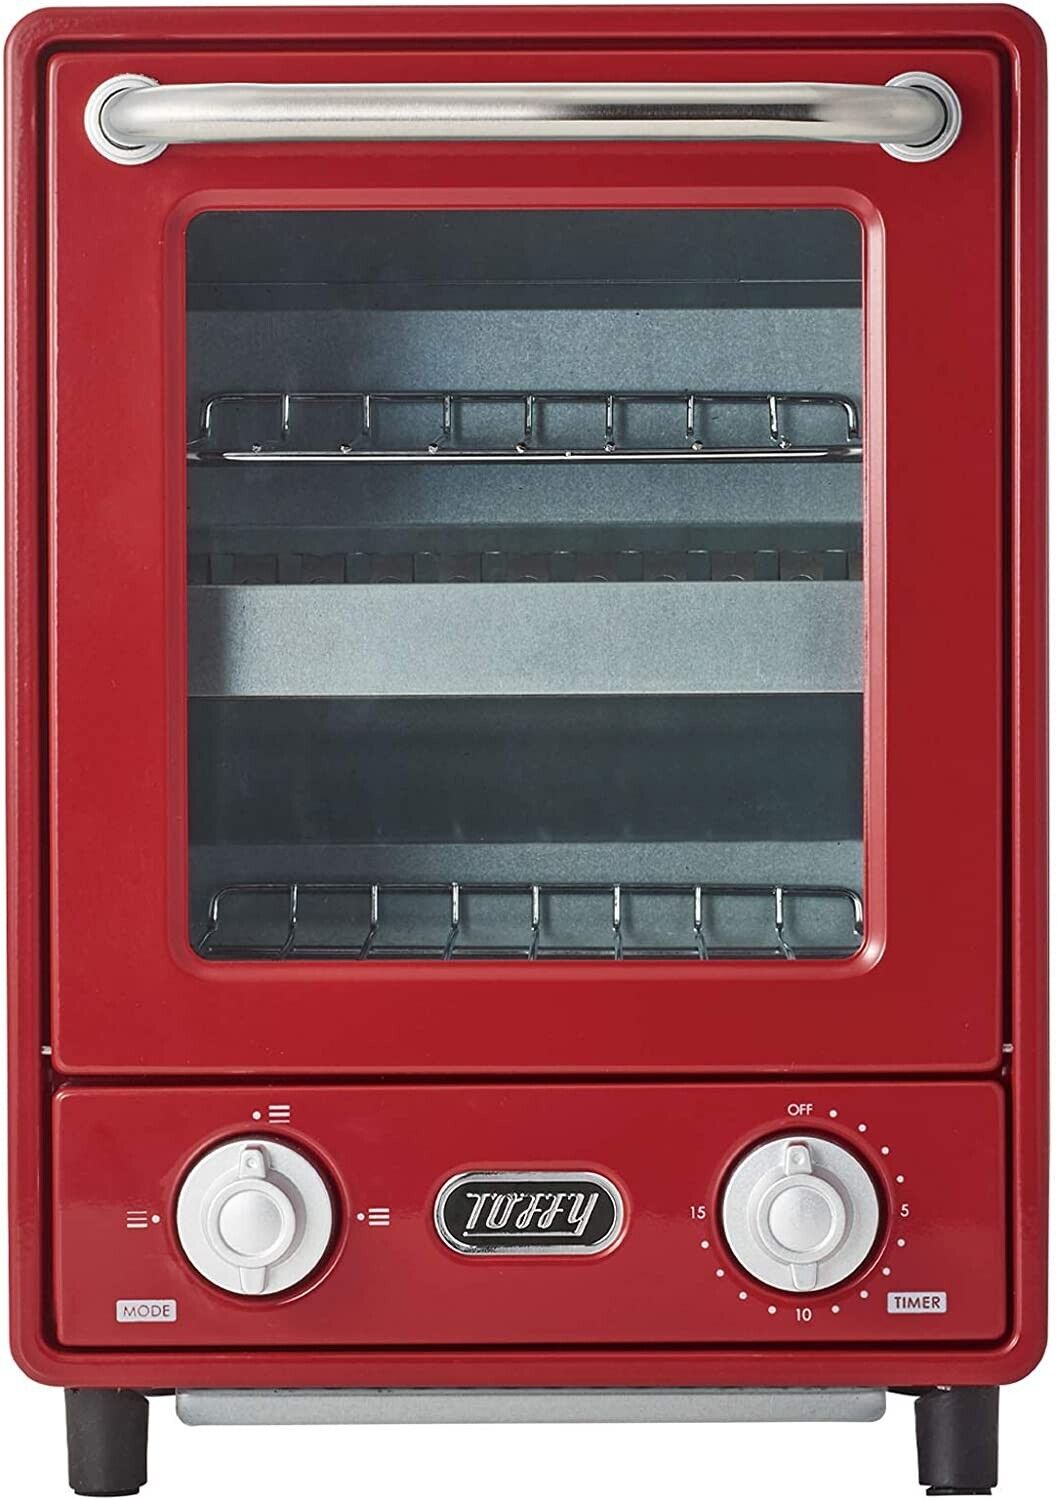 K-TS4-AR Toffy Oven Toaster Antique Red 2-Stage Toaster Slim K-TS4-AR AC100V New